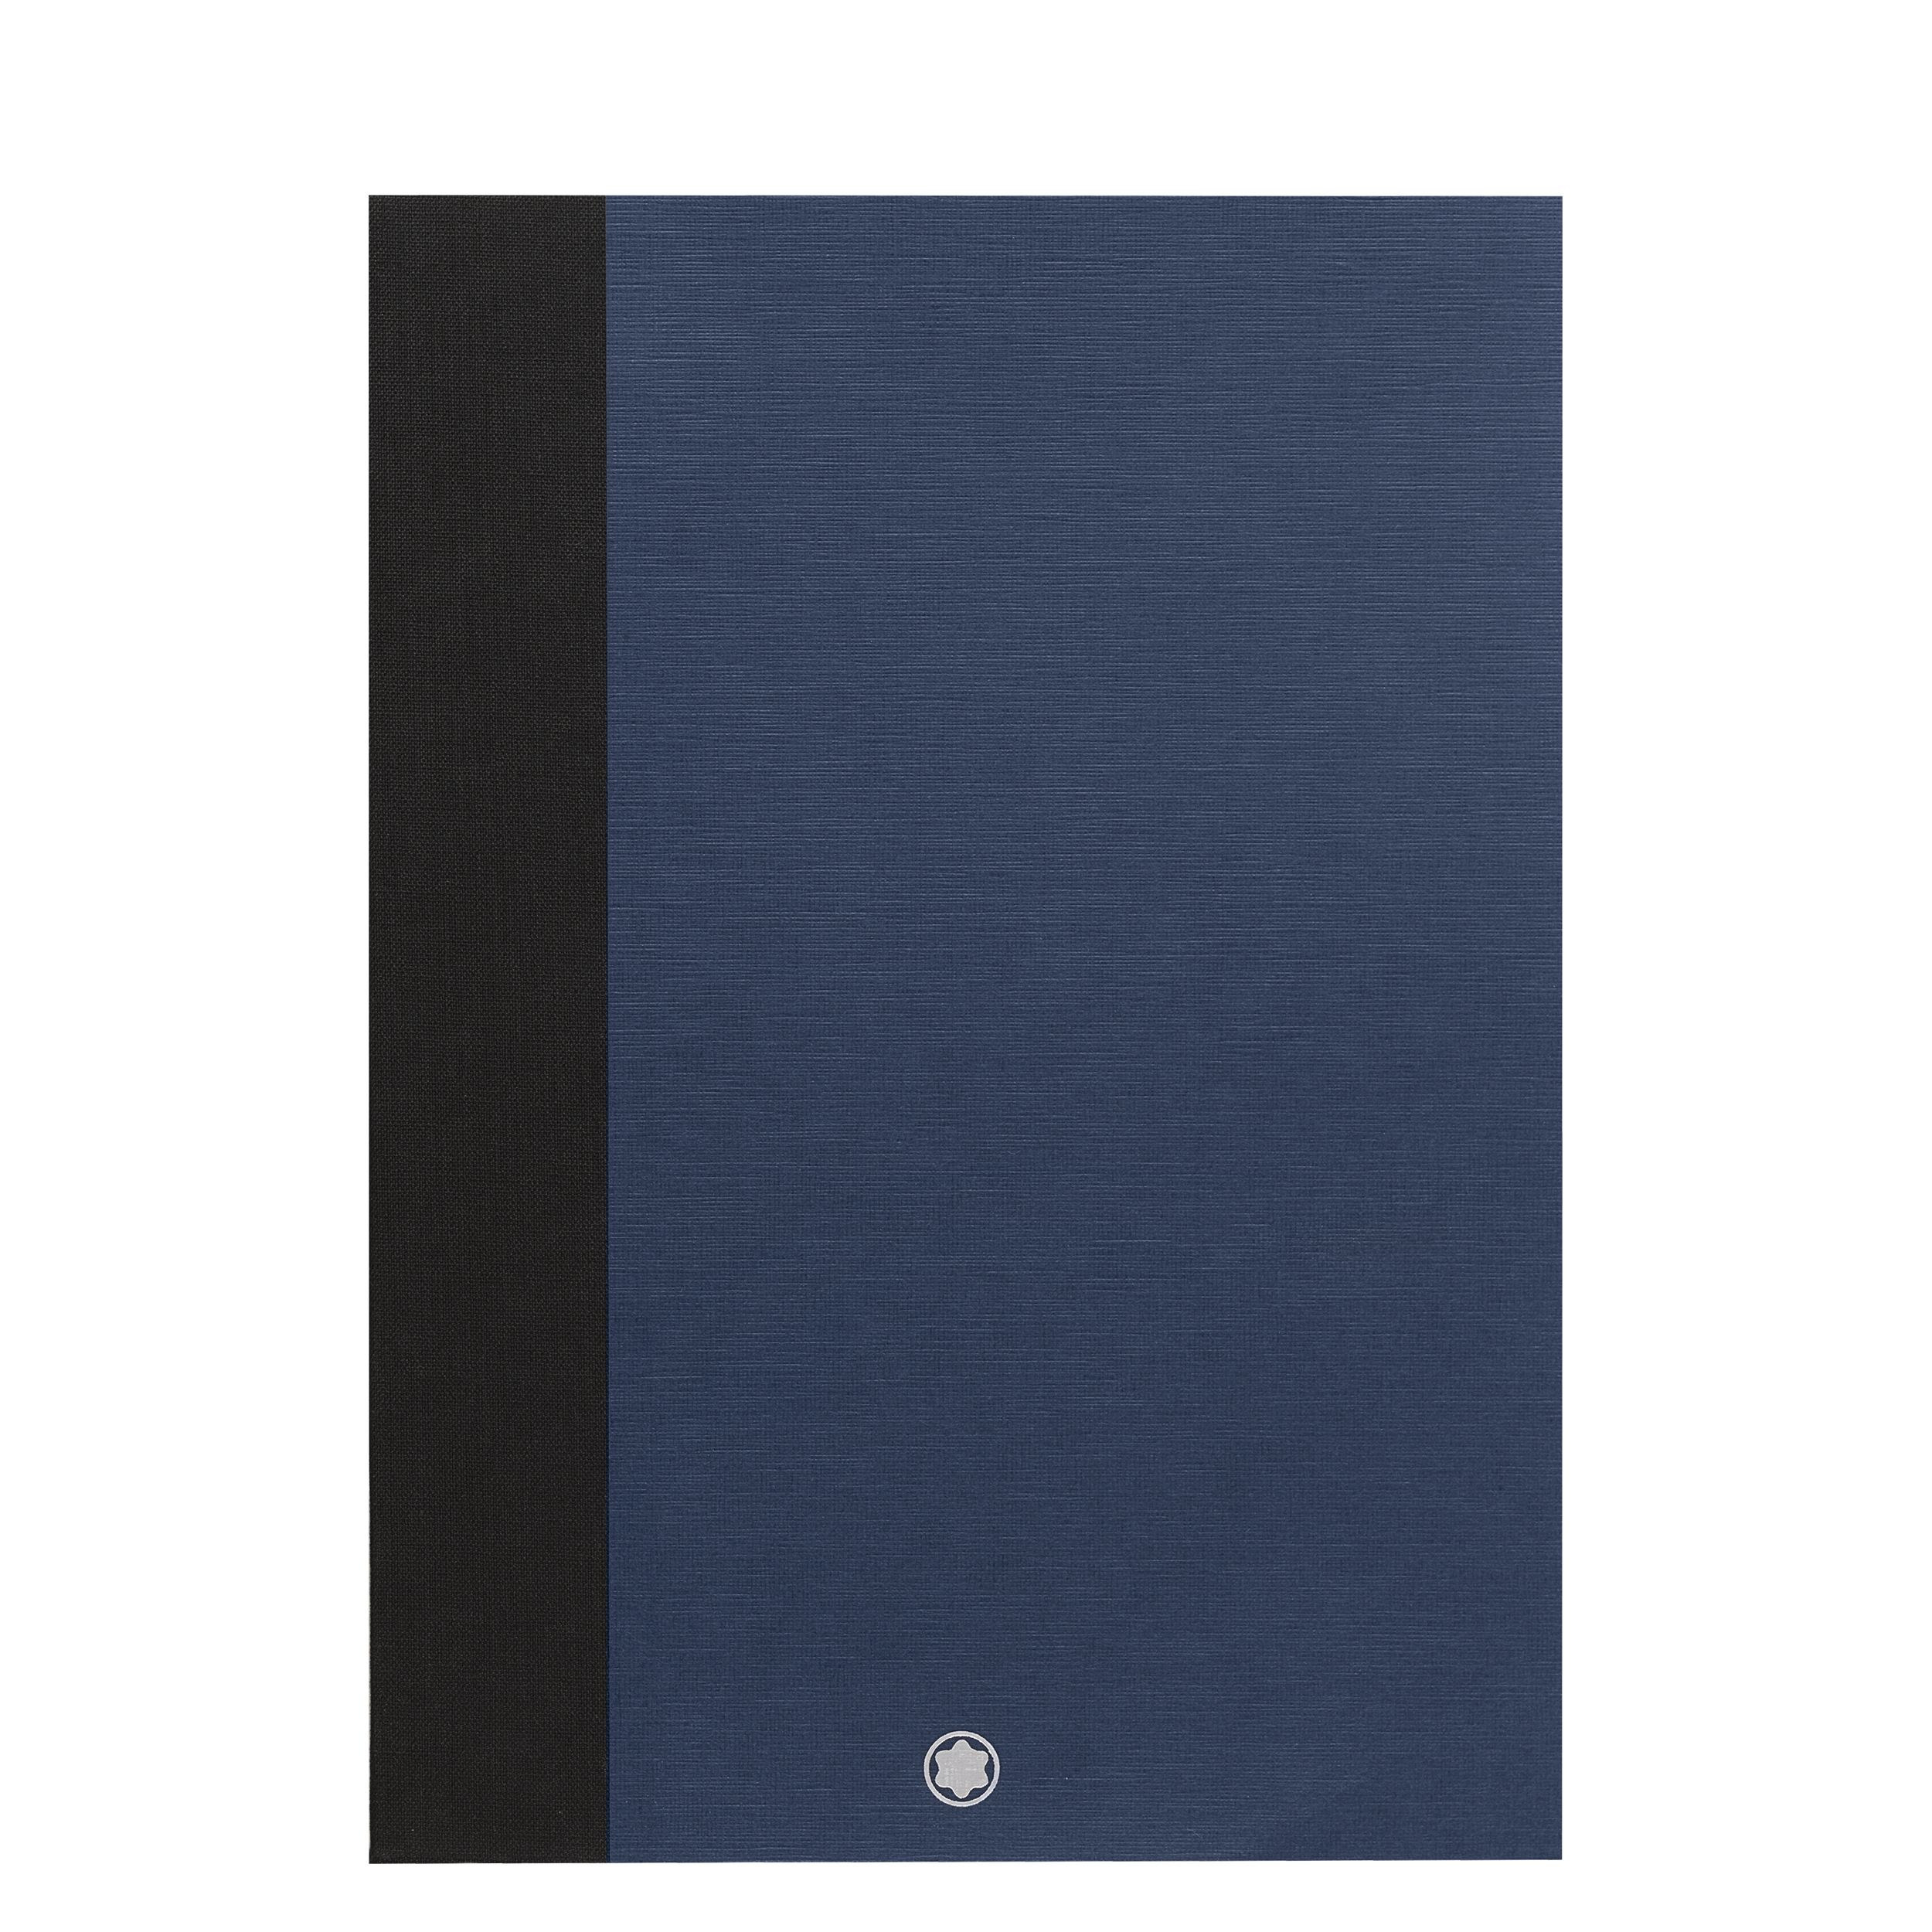 Montblanc Fine Stationery 2 Notebooks #146 Slim, Blue, blank for Augmented Paper, image 1